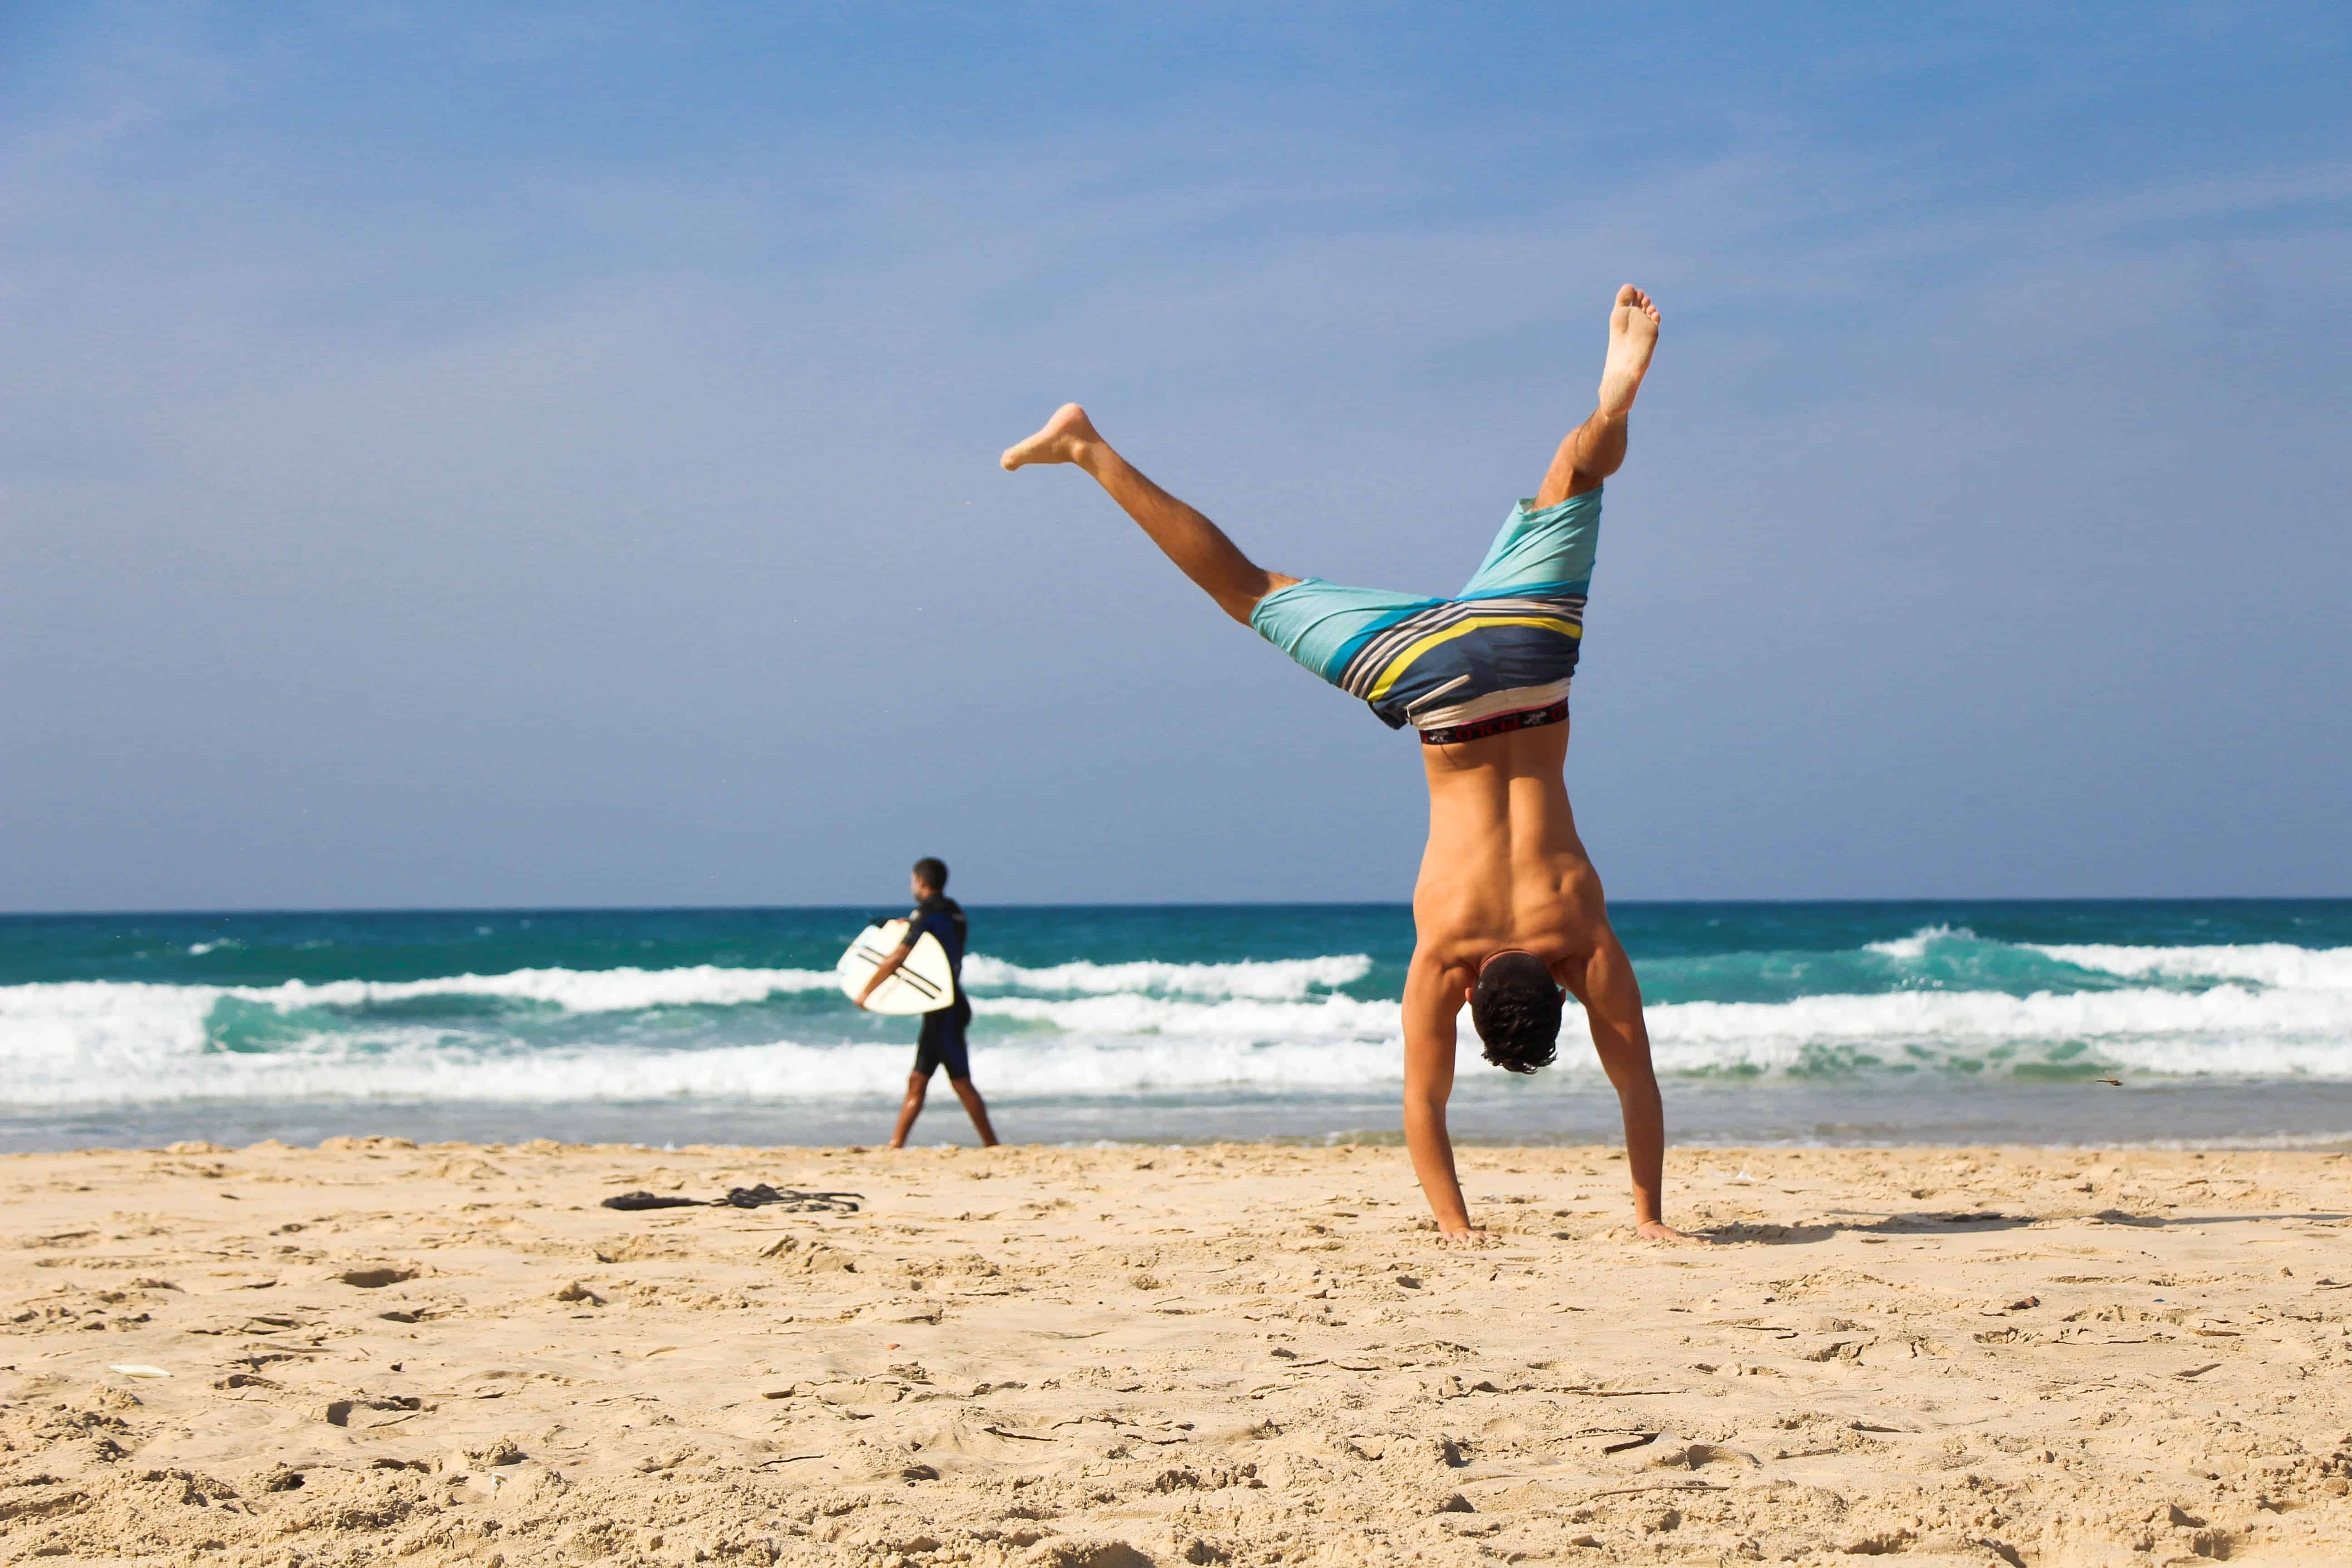 A surfer doing a handstand on the beach